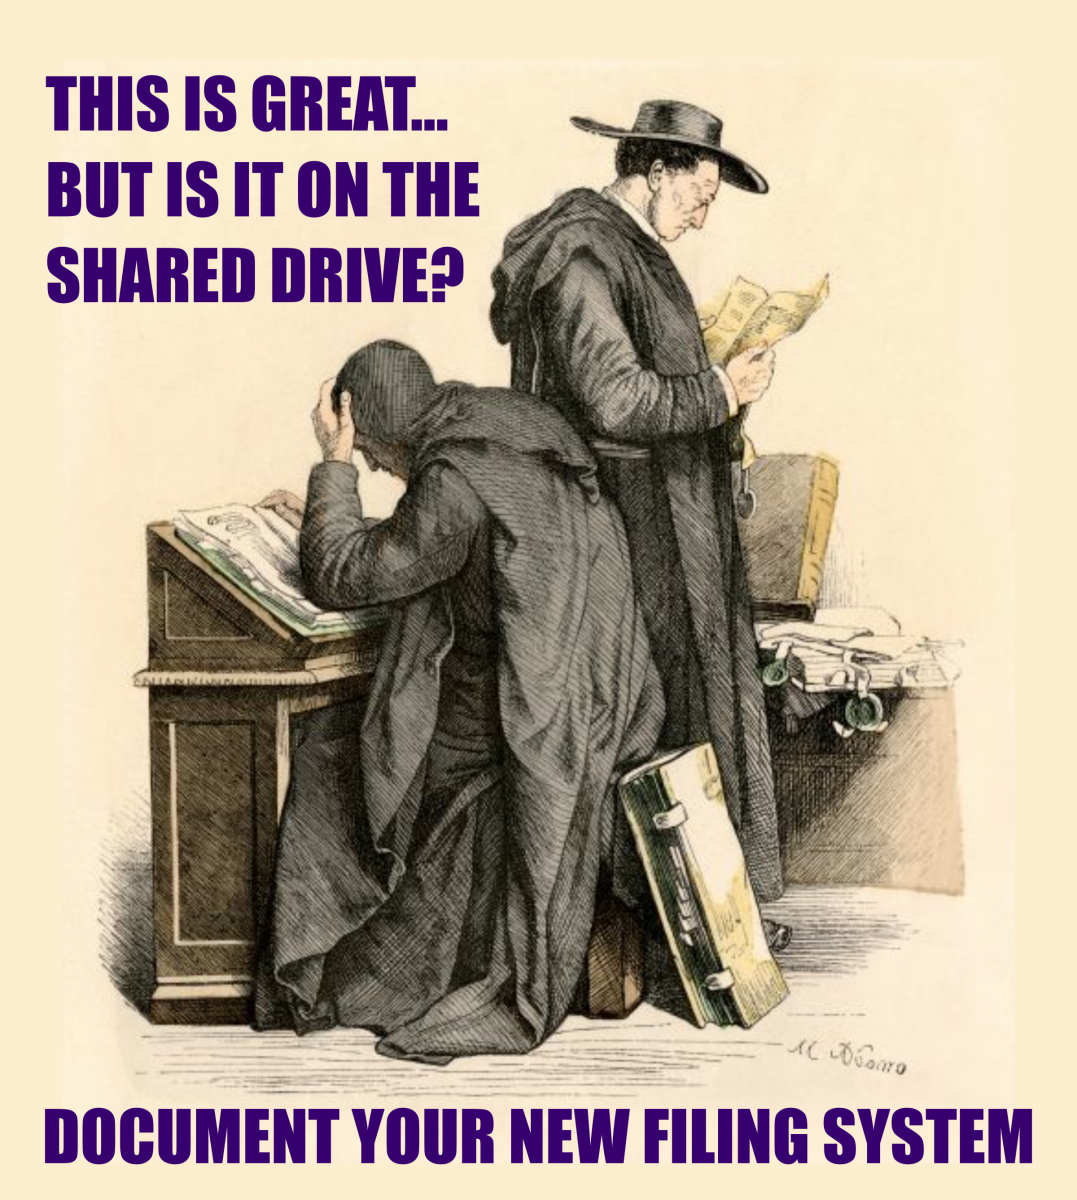 This is great, but is it on the shared drive? Document your new filing system